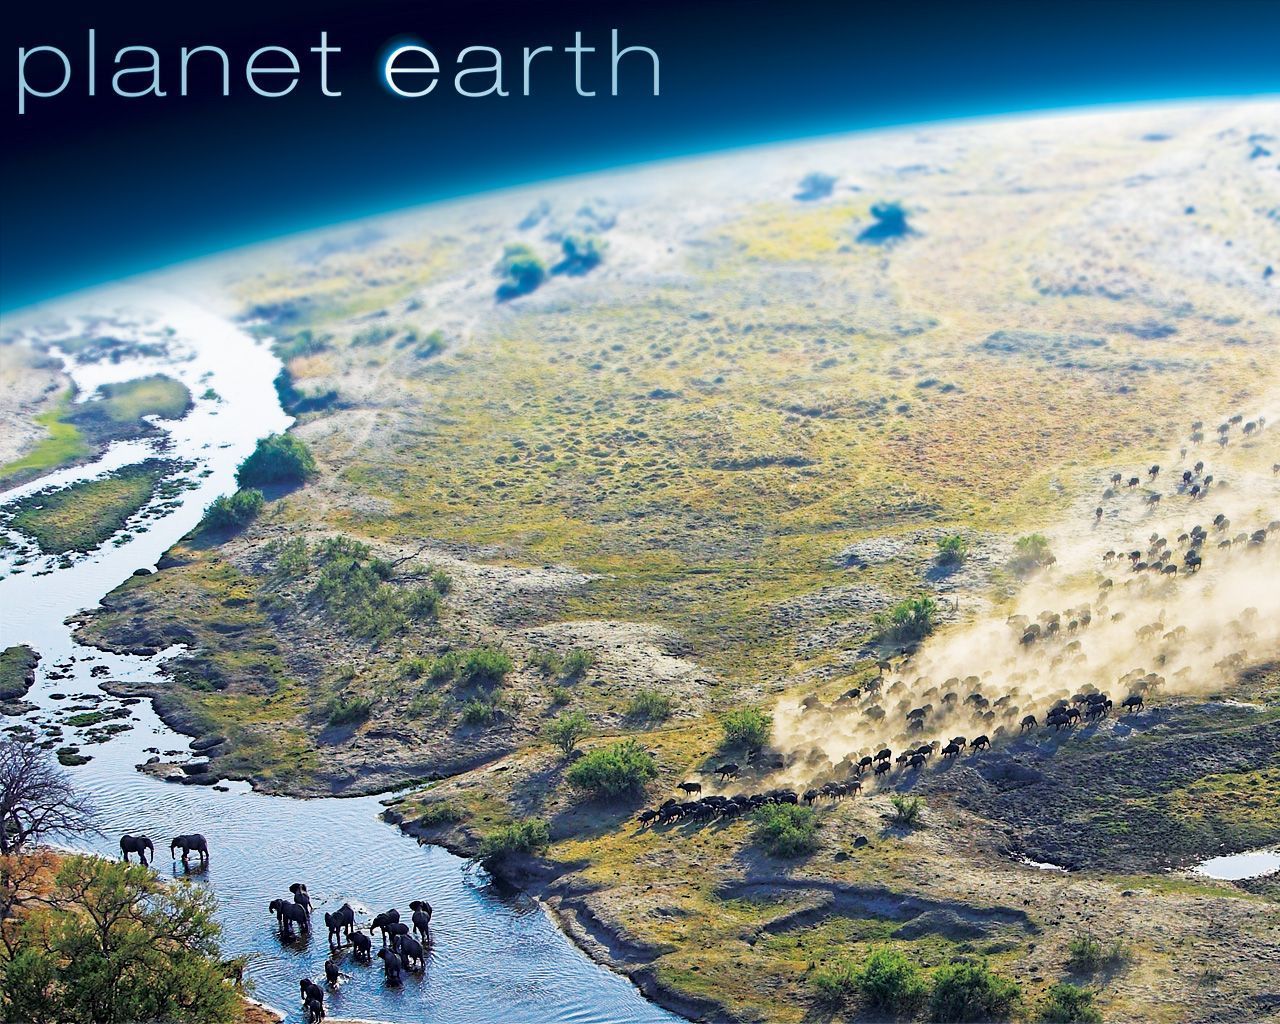 BBC Planet Earth Wallpaper - Pics about space